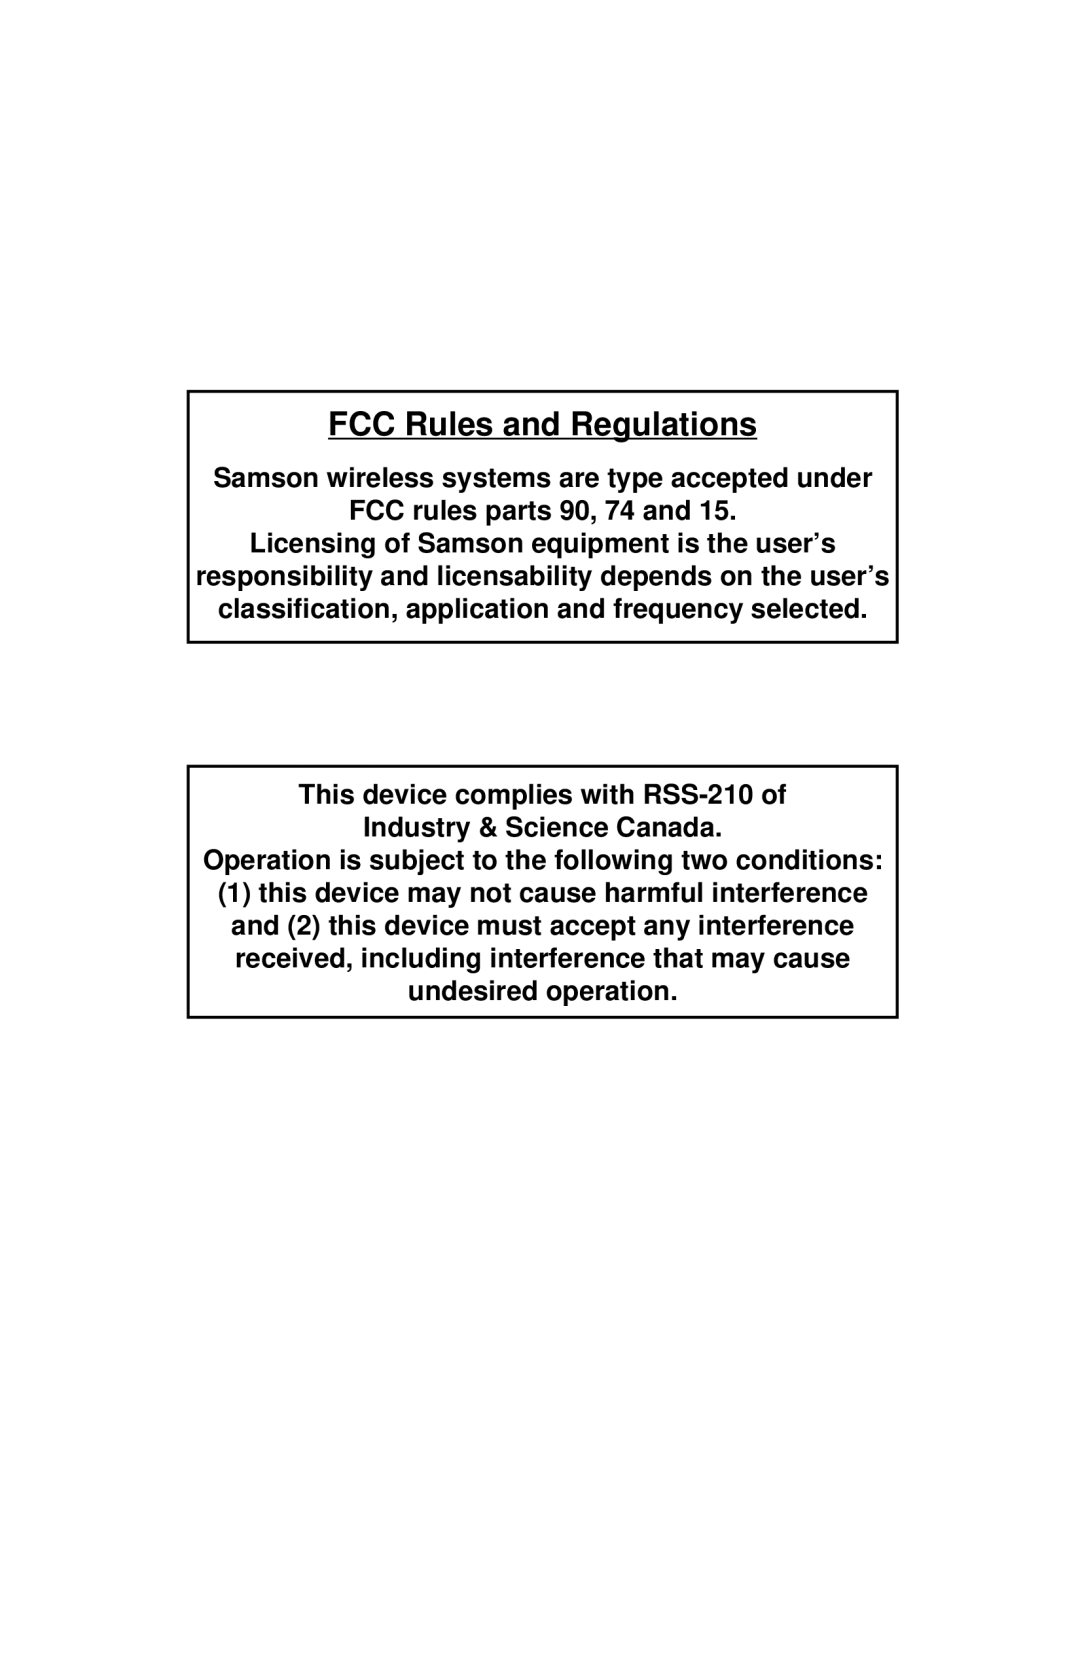 Samson UHF Series One owner manual FCC Rules and Regulations 